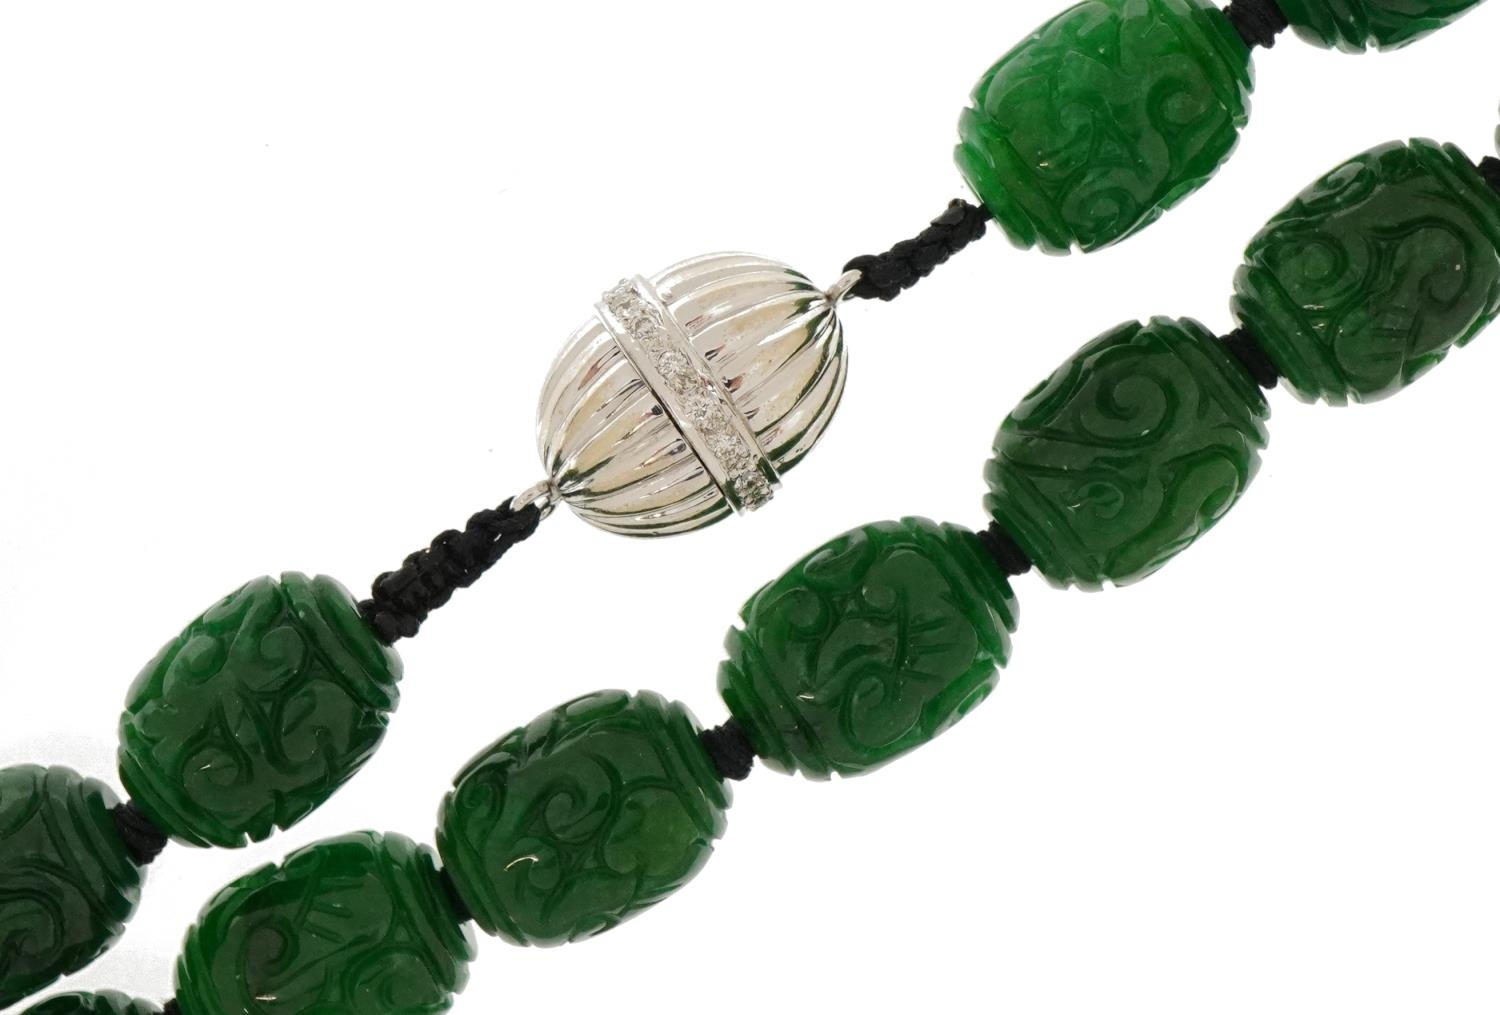 Chinese carved green jade bead necklace with 14ct white gold diamond set clasp, each bead 13.5mm x